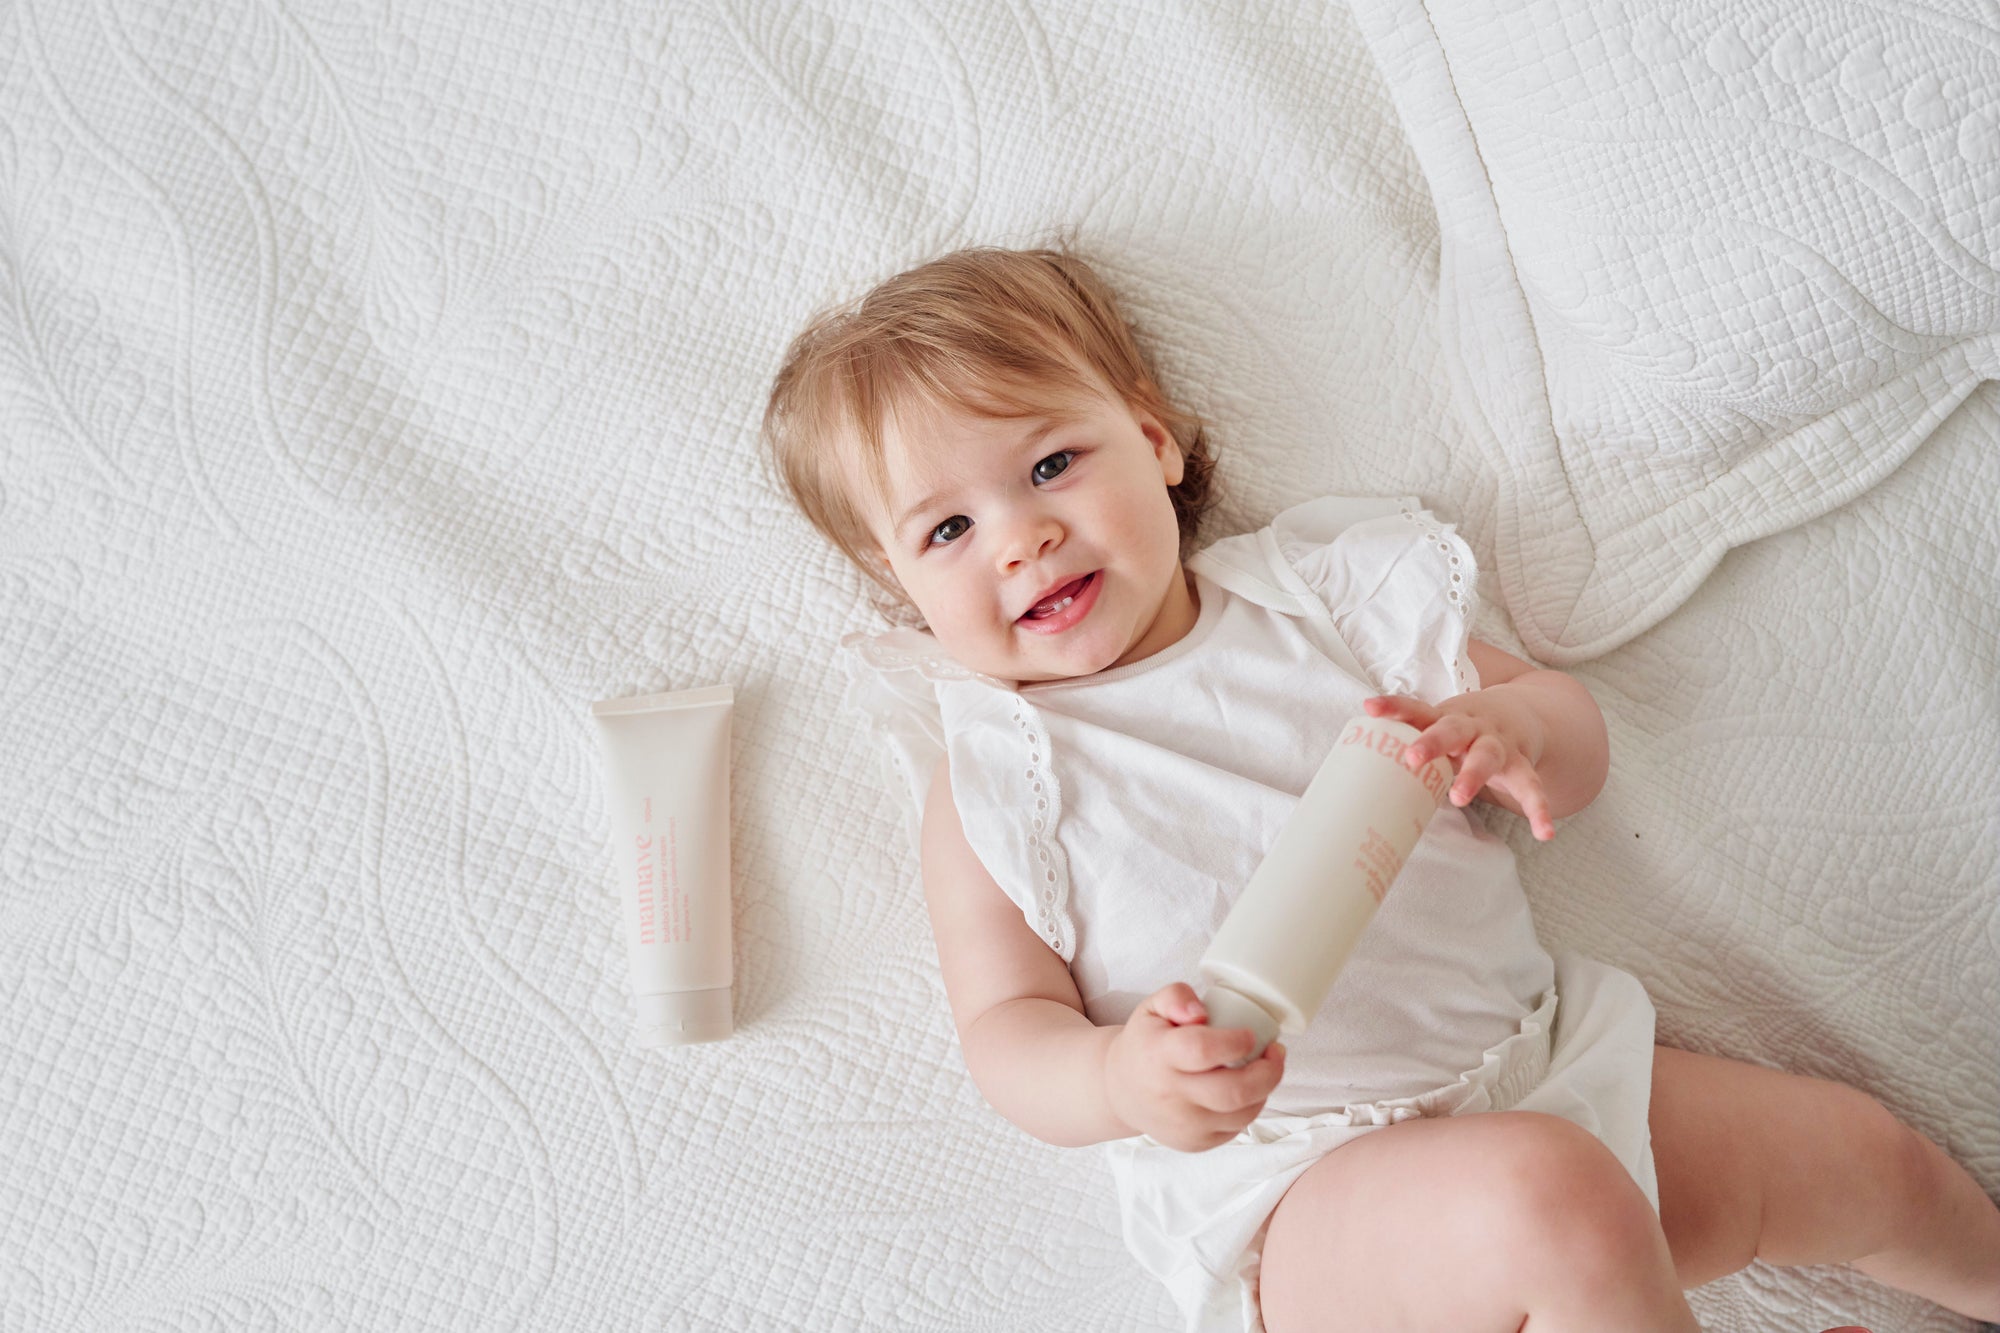 baby laying on bed looking up at camera with products in her hand